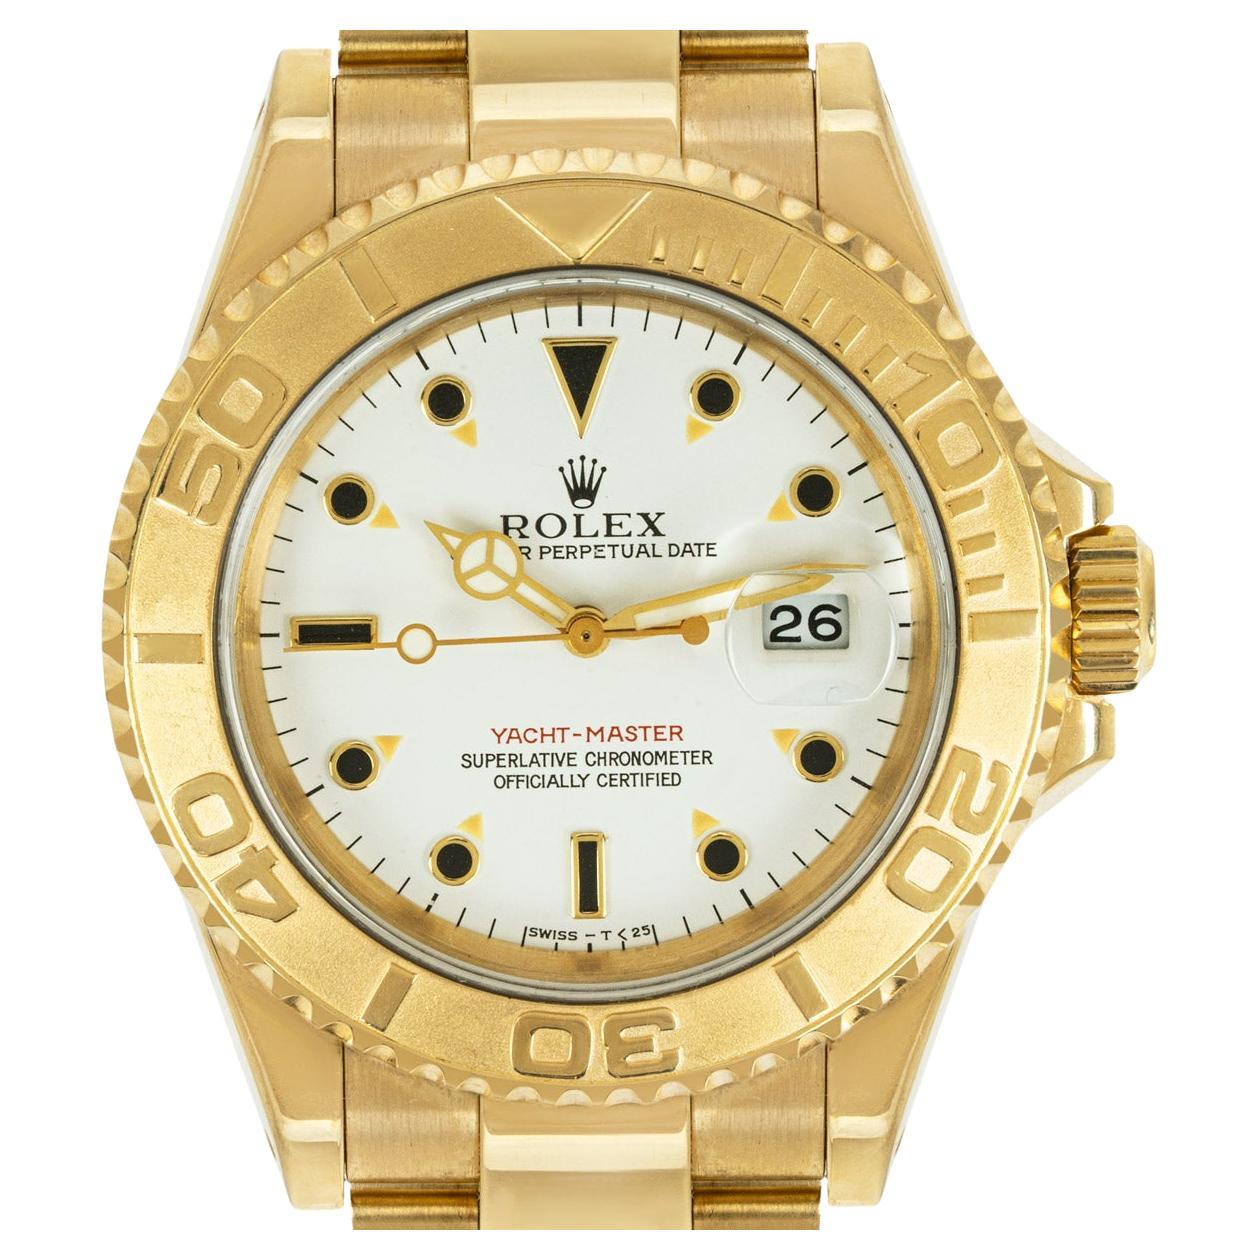 A Yacht-Master yellow gold wristwatch by Rolex. Featuring a white dial with applied hour markers, a date aperture and a uni-directional rotating bezel in yellow gold.

The watch further features a sapphire glass, a self-winding automatic movement